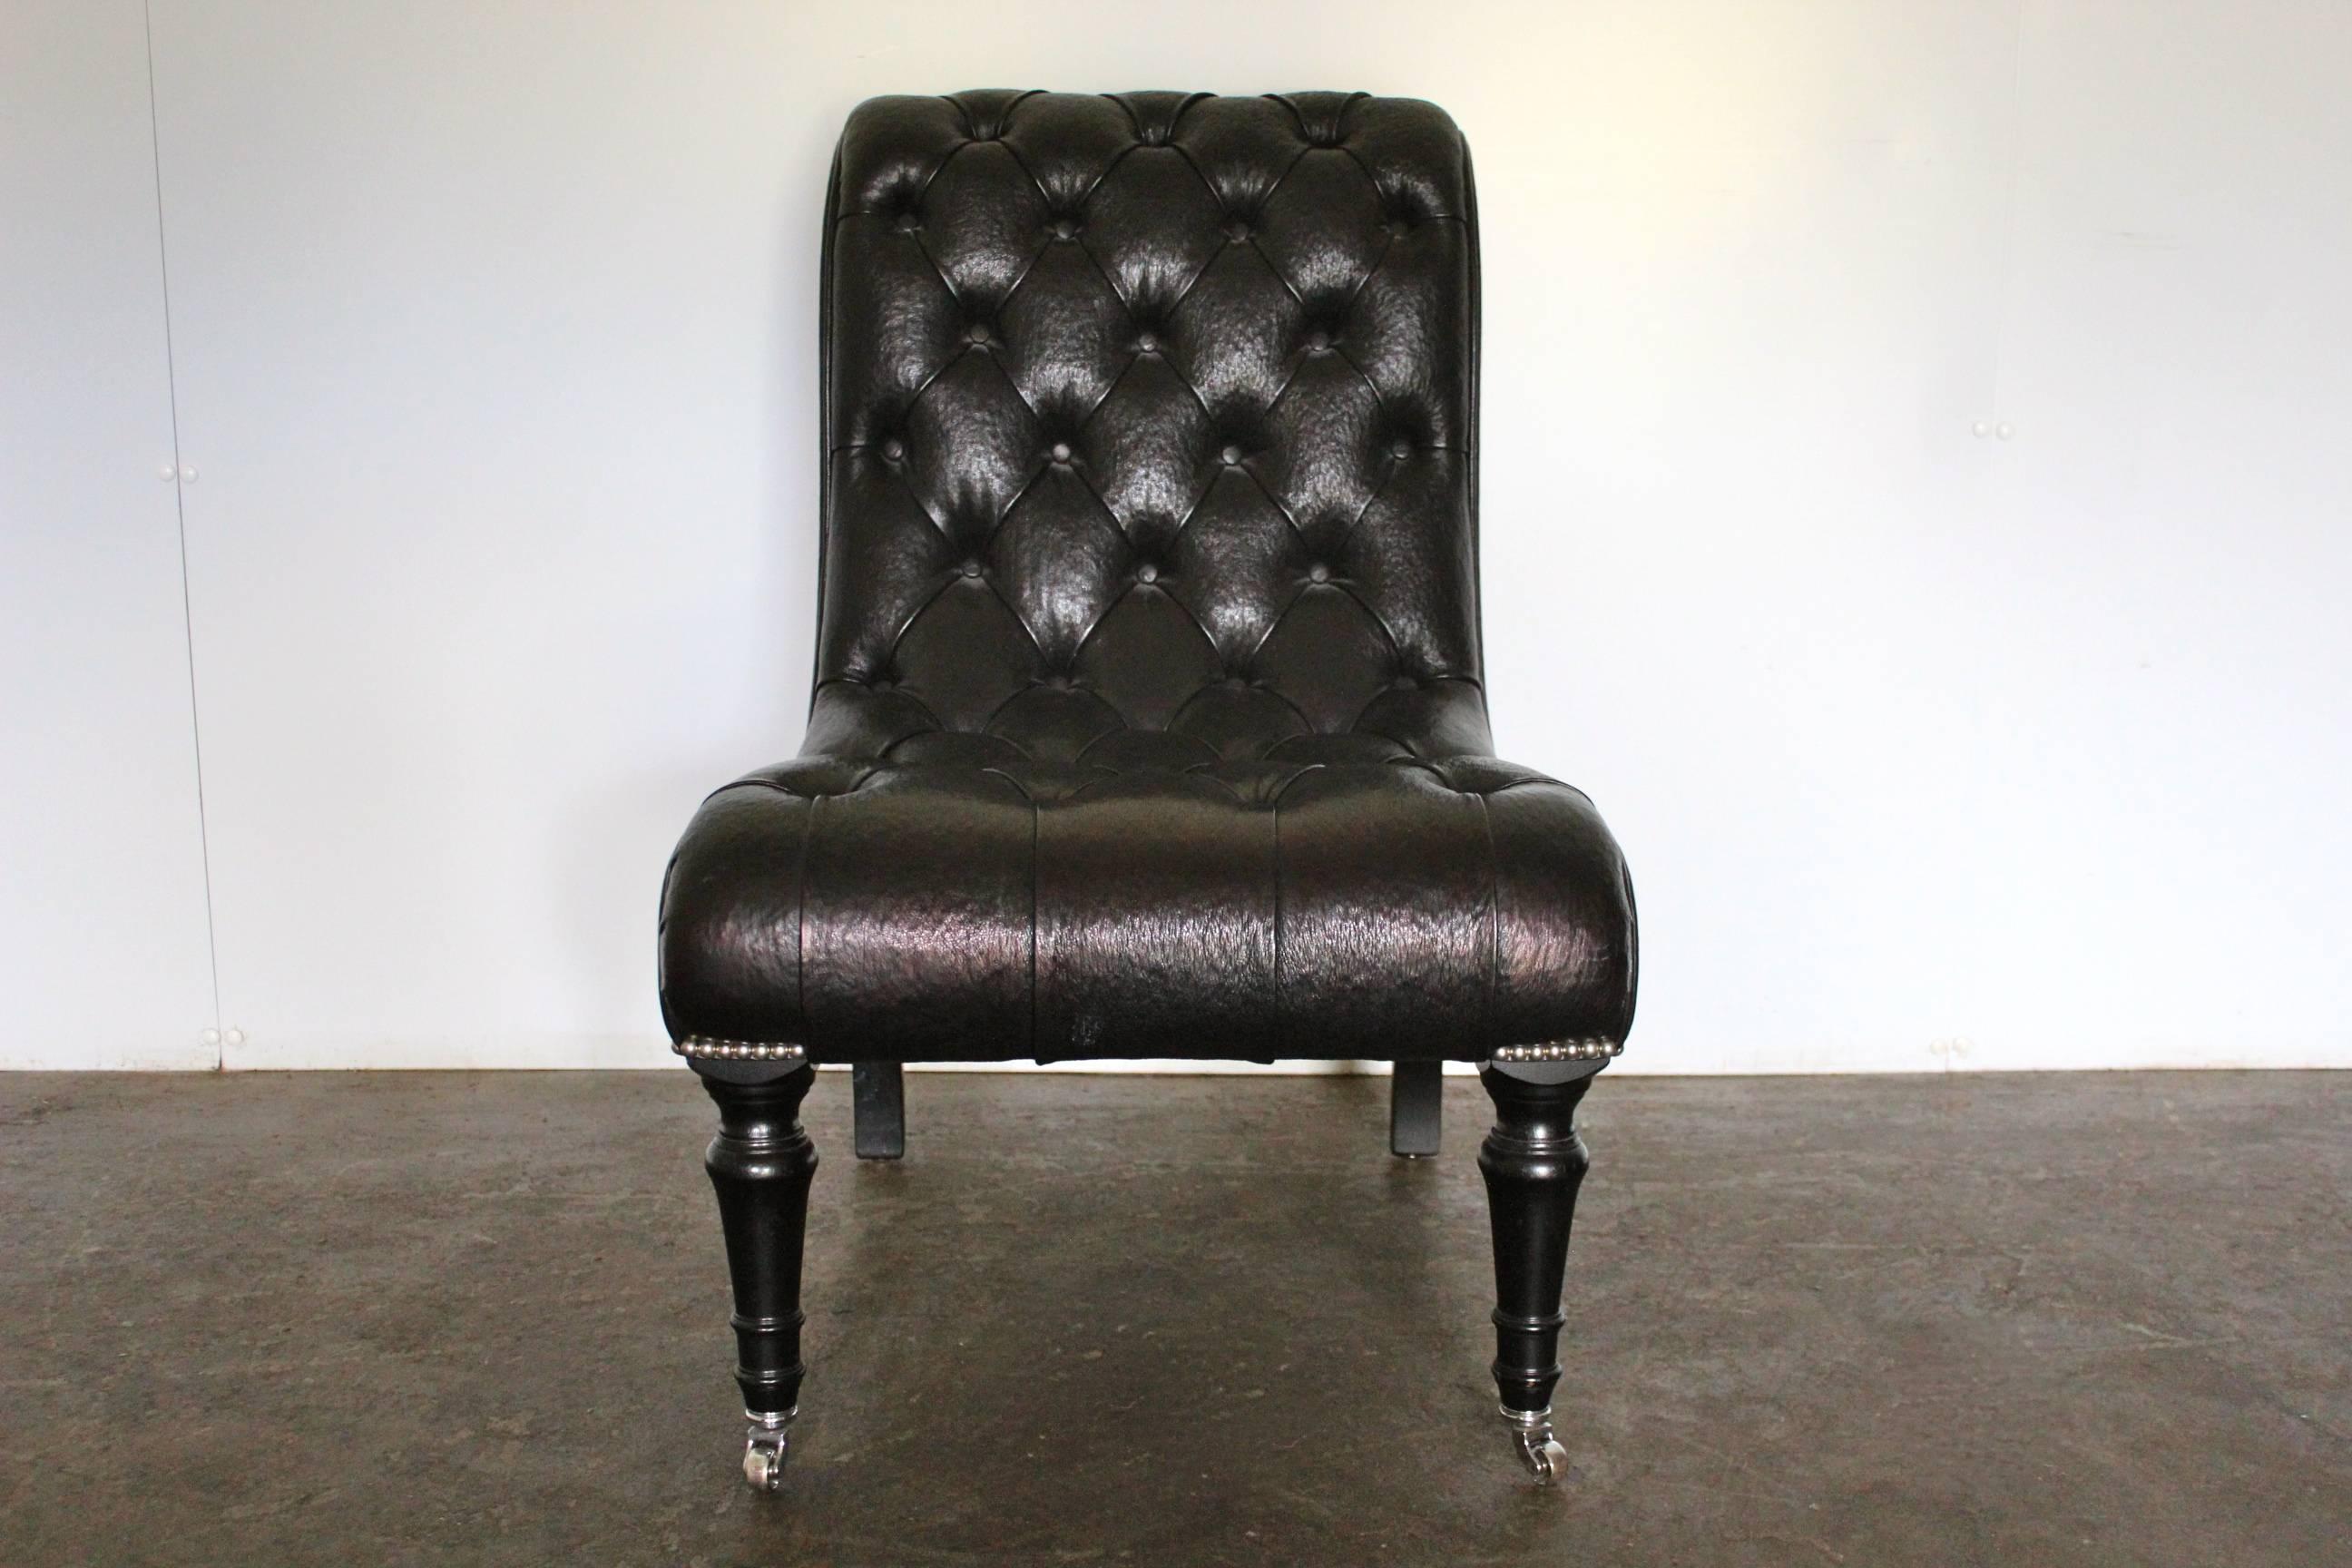 American Classical George Smith “Brewster” Armchair in Special-Order Black Leather